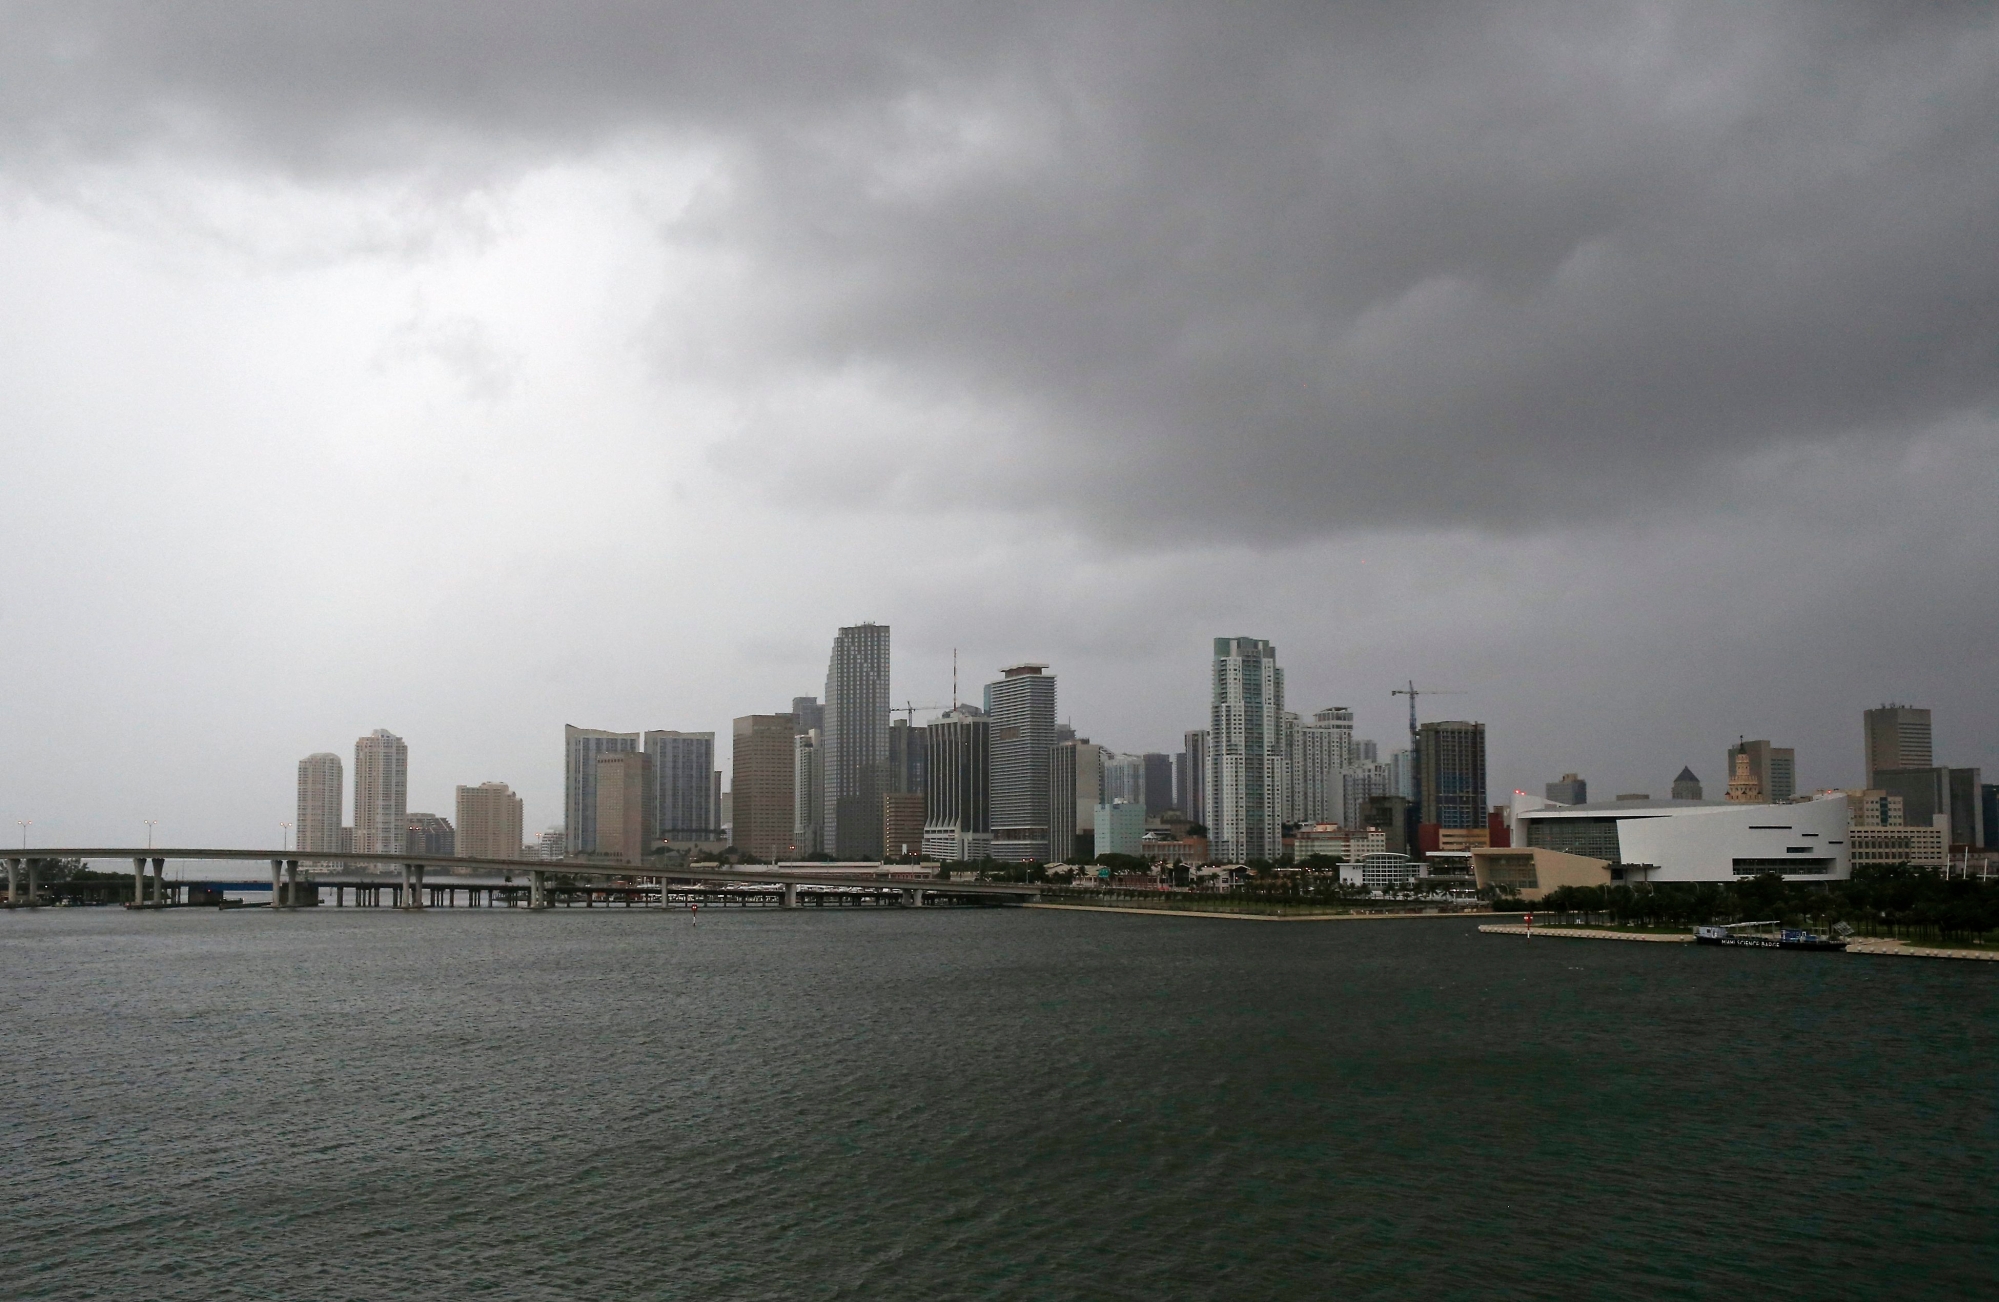 Clouds cover the Miami skyline as the outer bands of Hurricane Irma reached South Florida early Saturday, Sept. 9, 2017 in Miami. Gov. Rick Scott is urging anyone living in an evacuation zone in southwest Florida to leave by noon as the threat of Hurricane Irma has shifted west.  (David Santiago/Miami Herald via AP) USA HURRIKAN IRMA